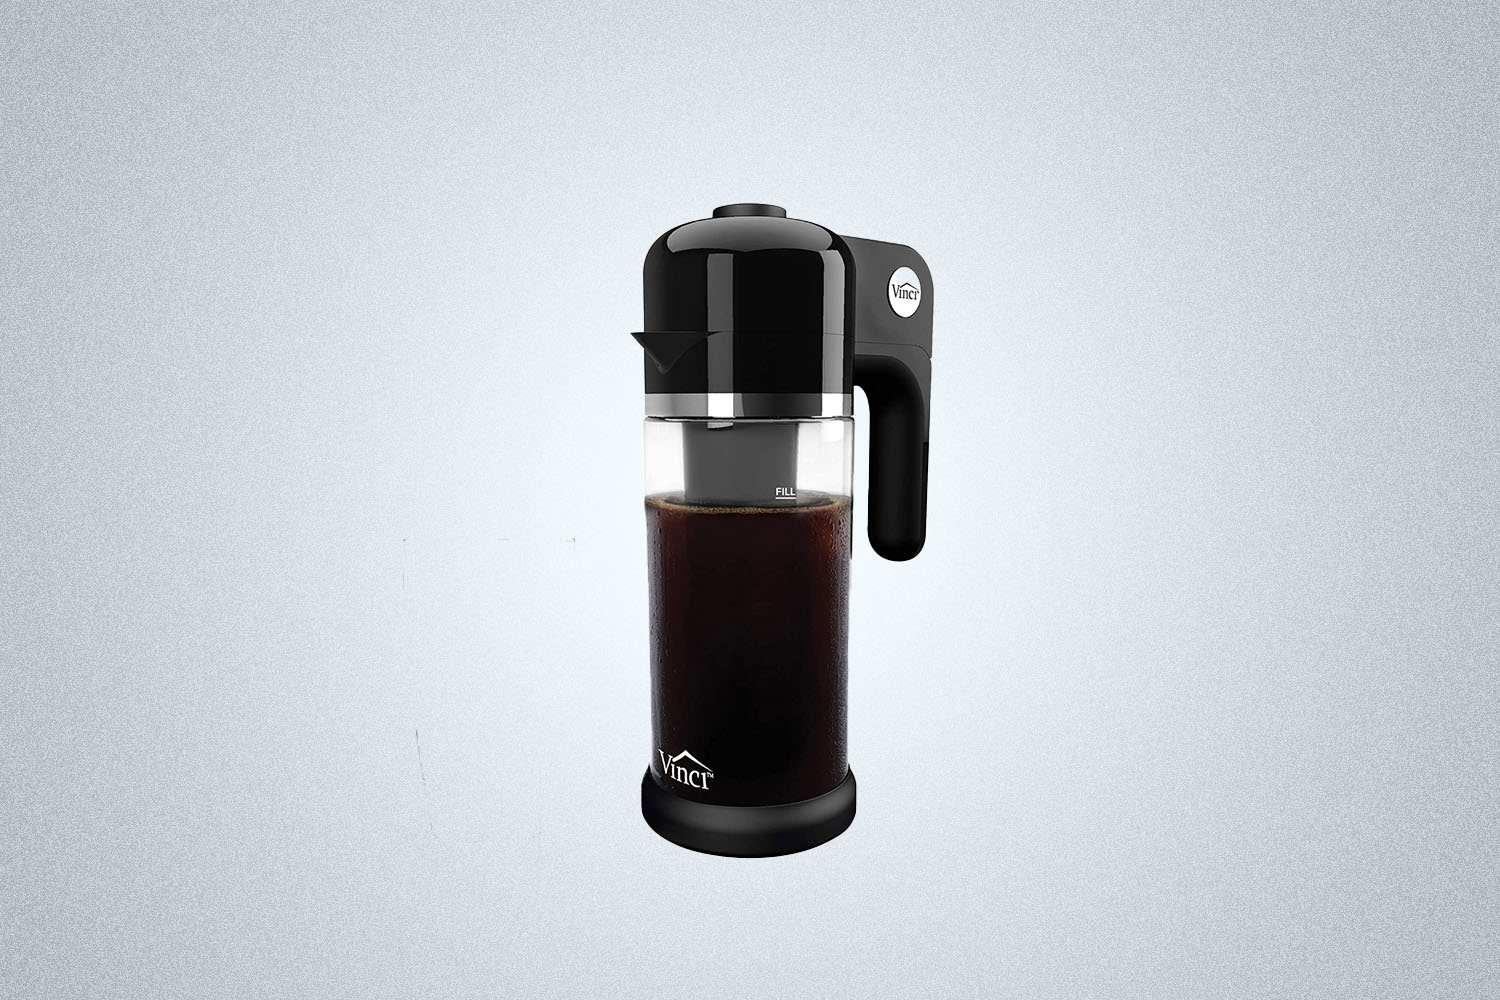 5 cold brew coffee makers that'll keep you fueled all summer long